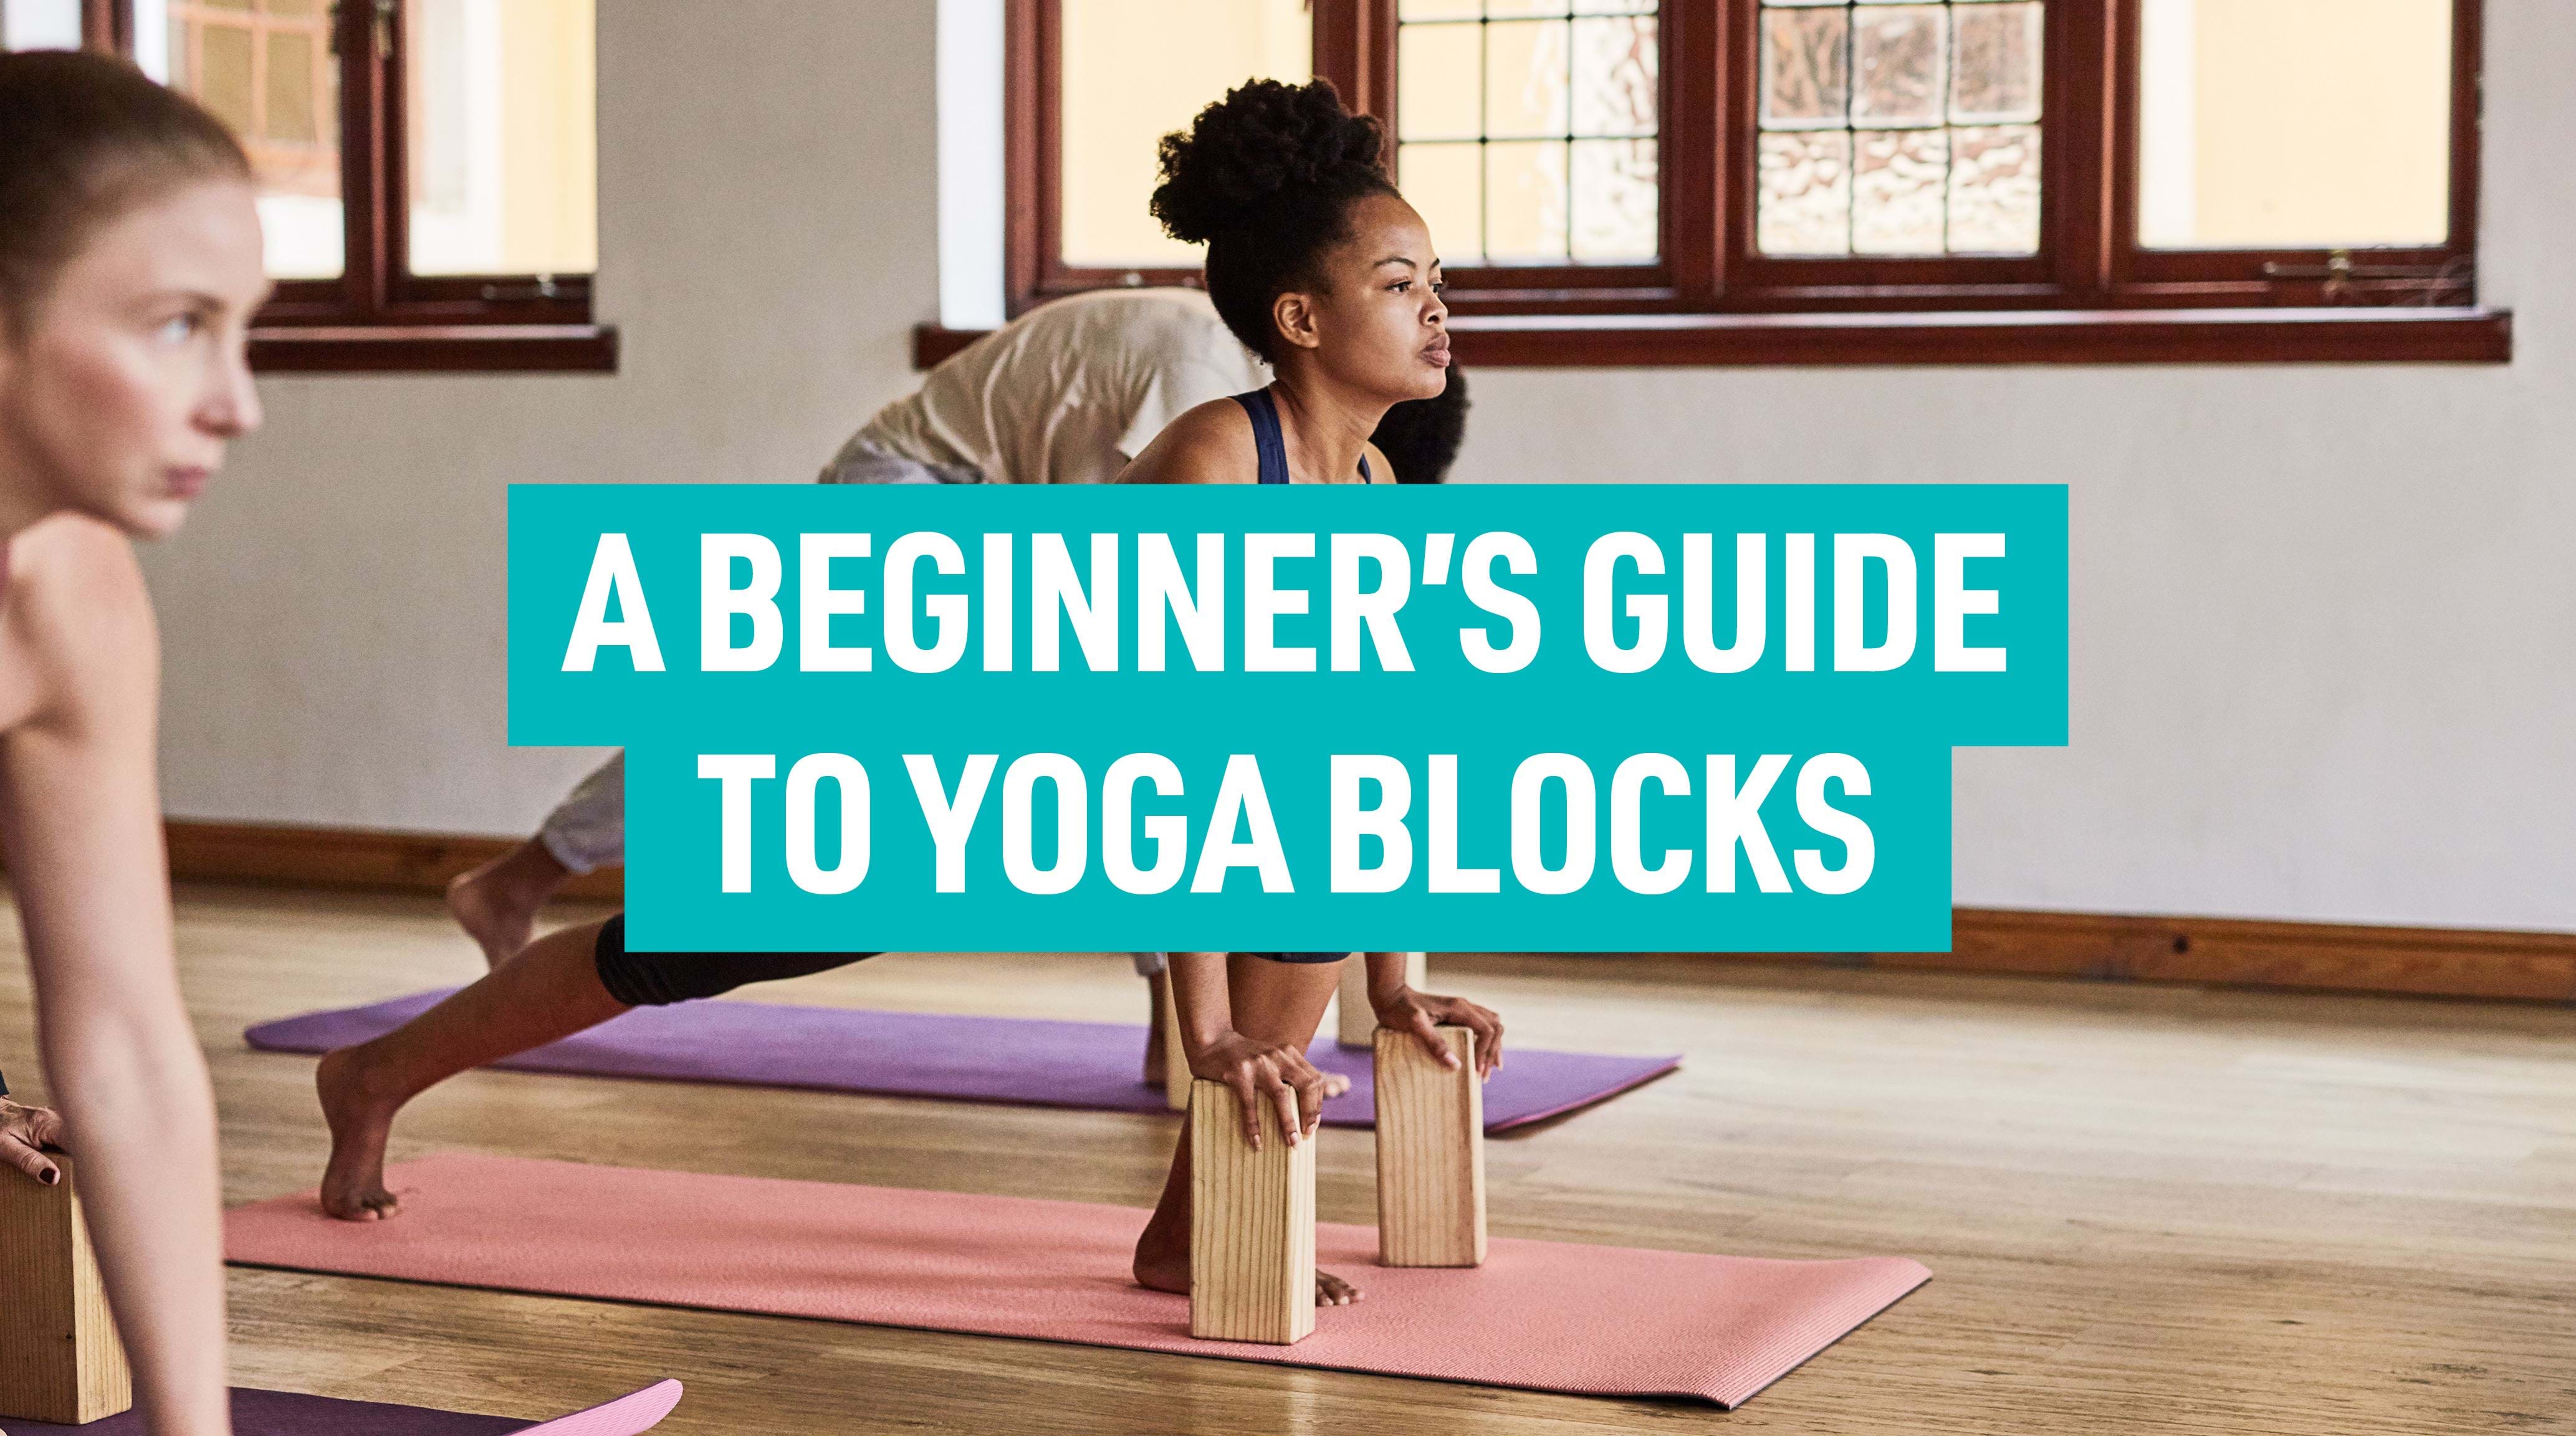 Beginner's Guide to Yoga - Your Essential Tutorial